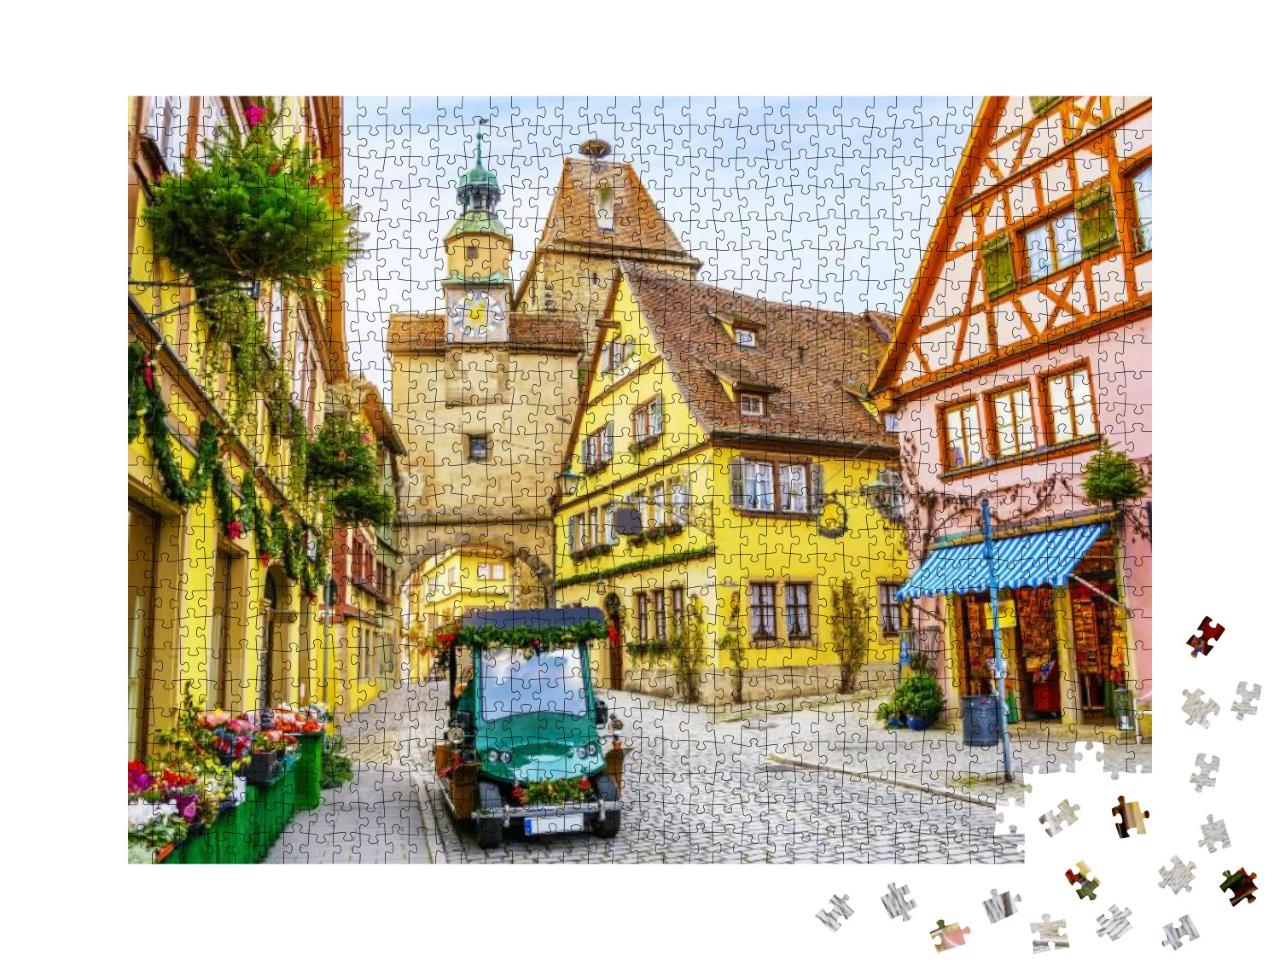 Touristic Retro Car on Picturesque Street, Decorated for... Jigsaw Puzzle with 1000 pieces